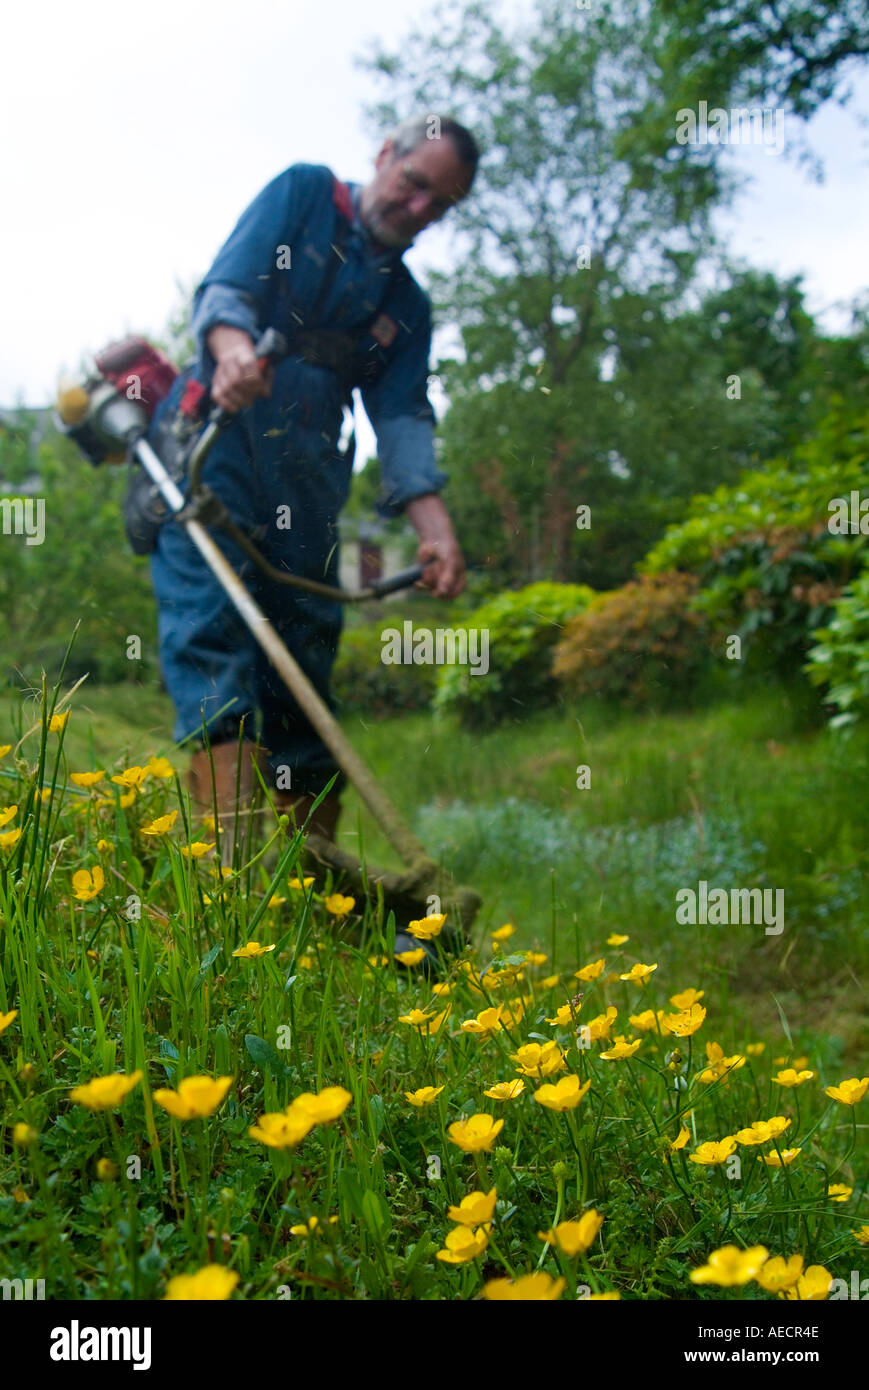 man strimming the grass with buttercups growing Stock Photo